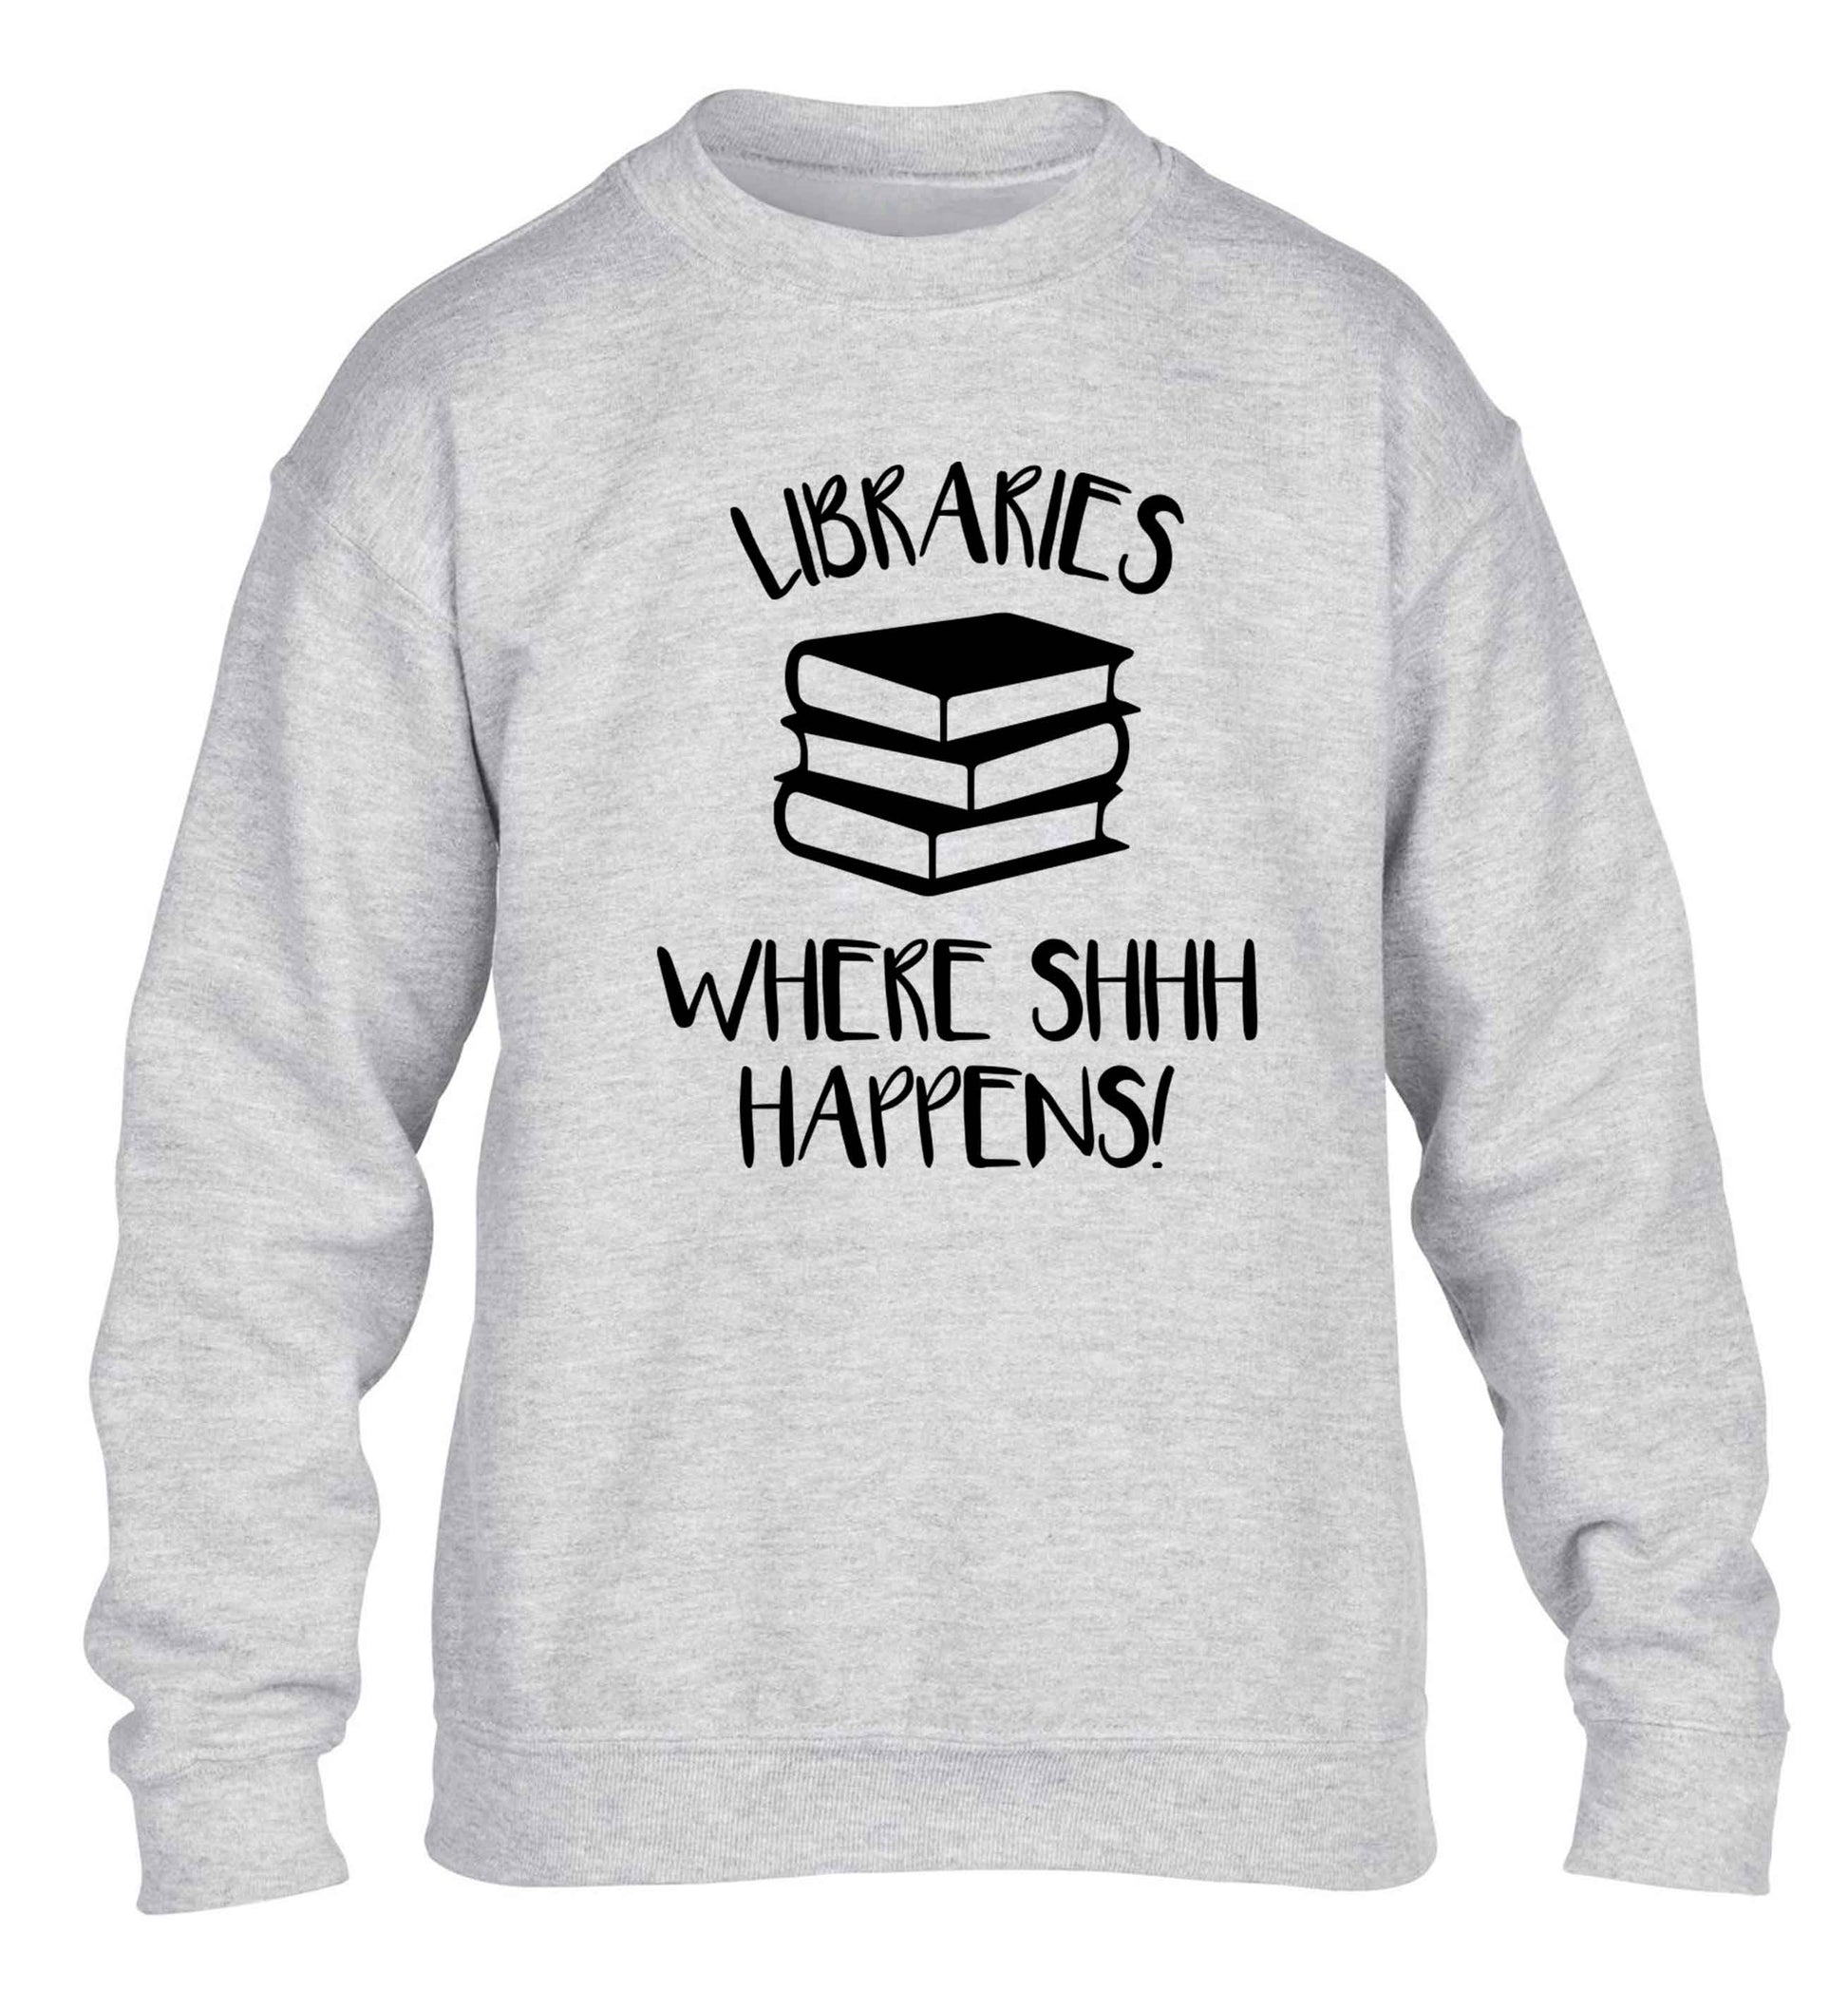 Libraries where shh happens! children's grey sweater 12-13 Years